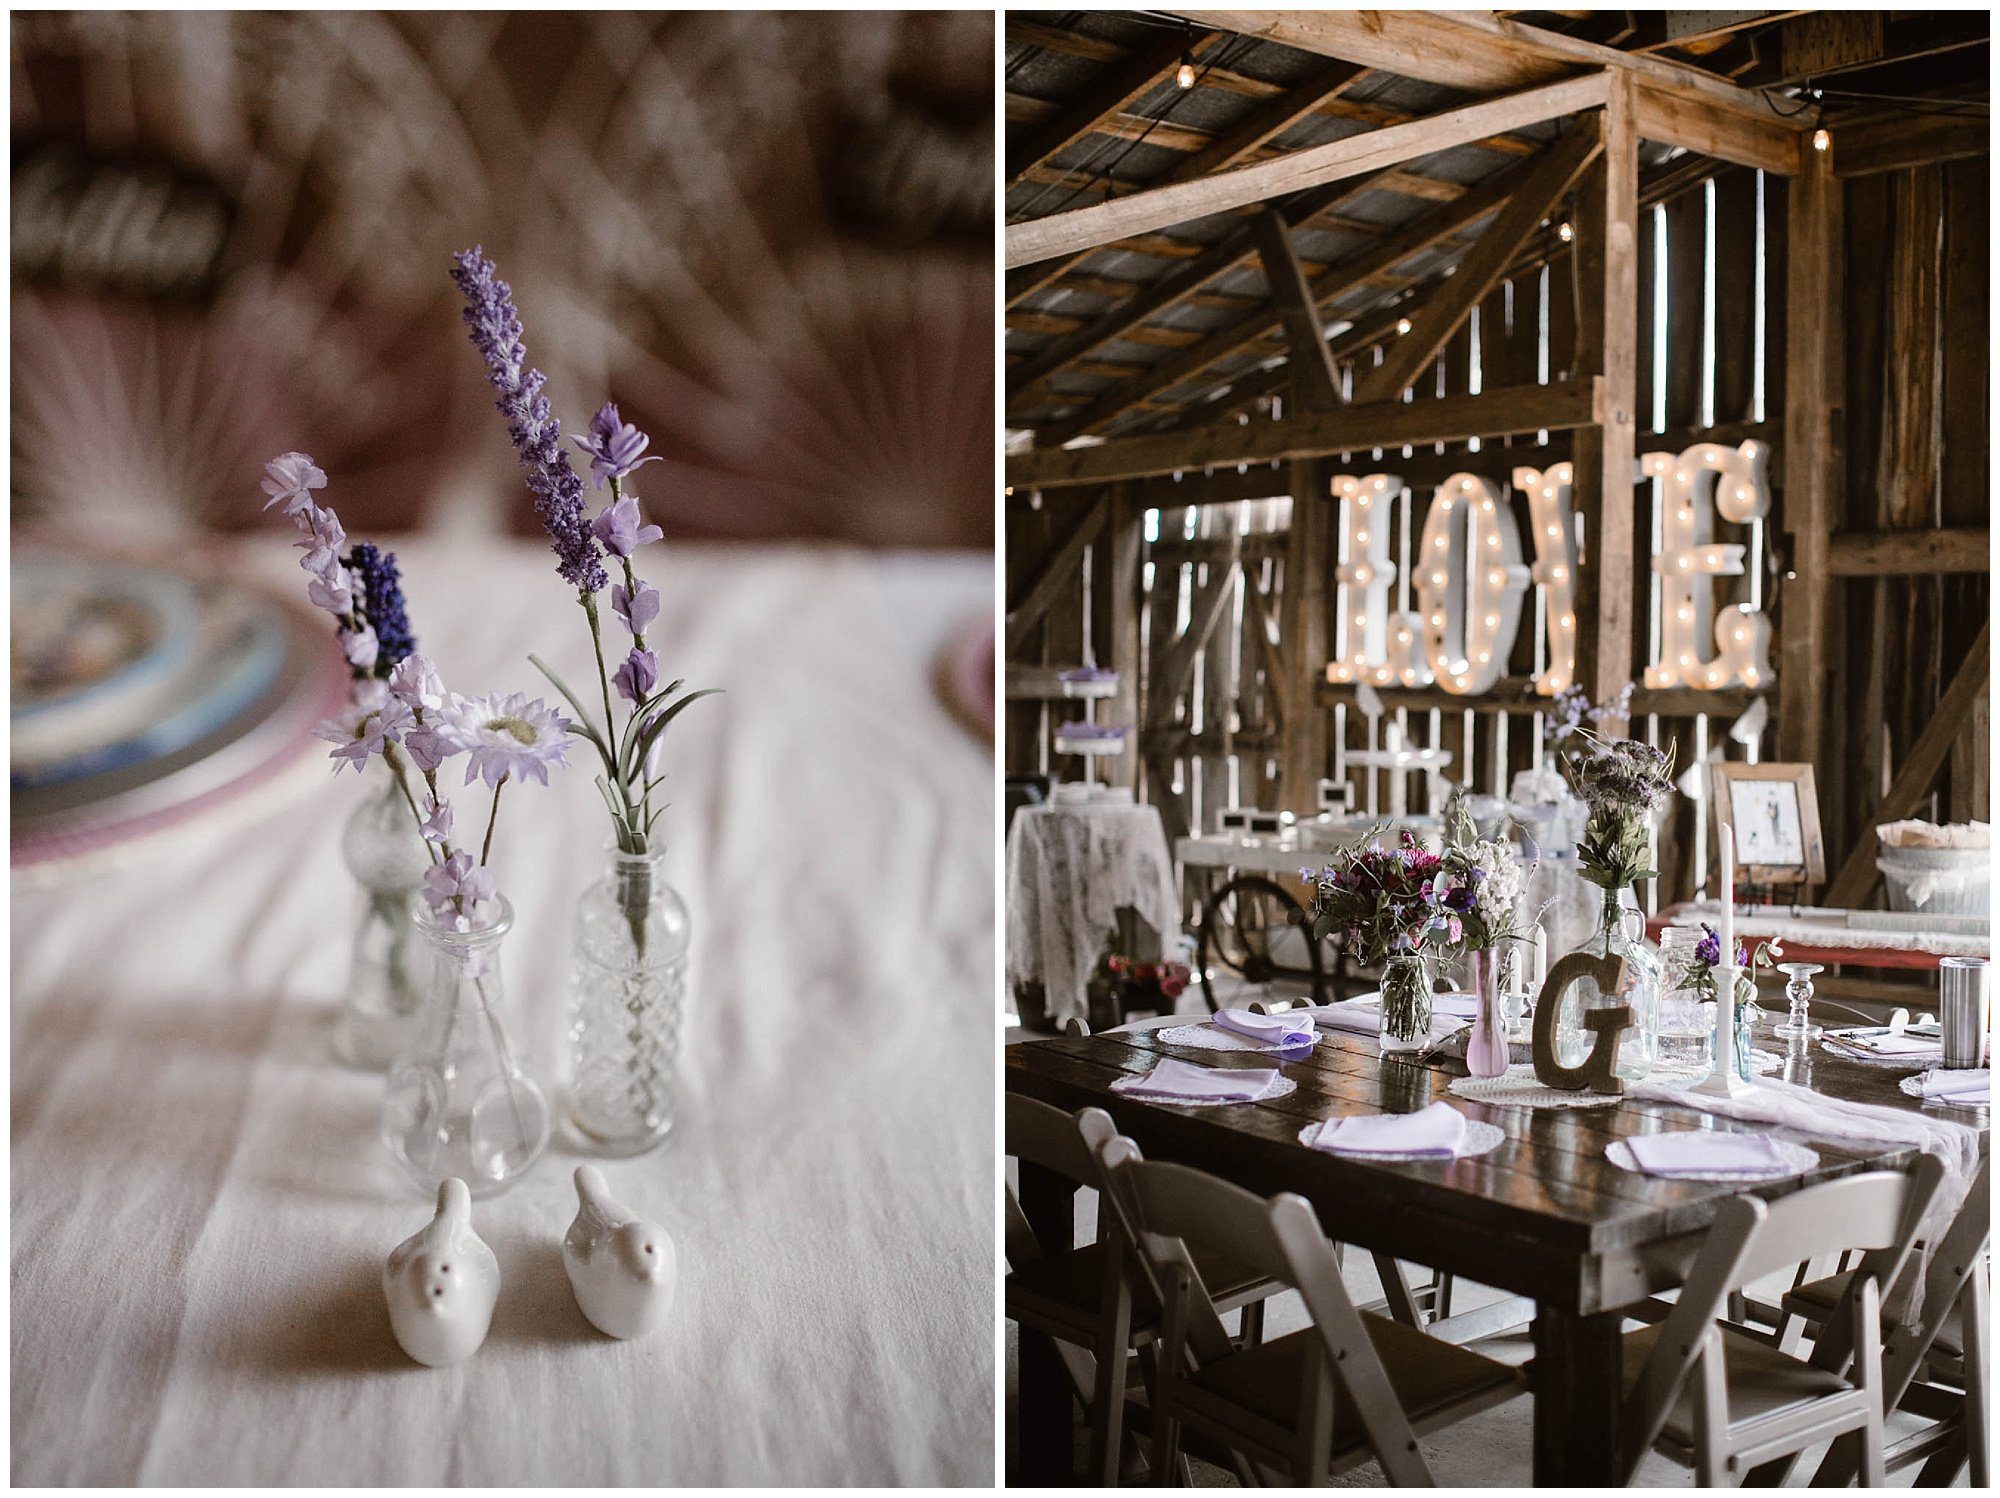 Details at Heartland Meadows Wedding in Knoxville